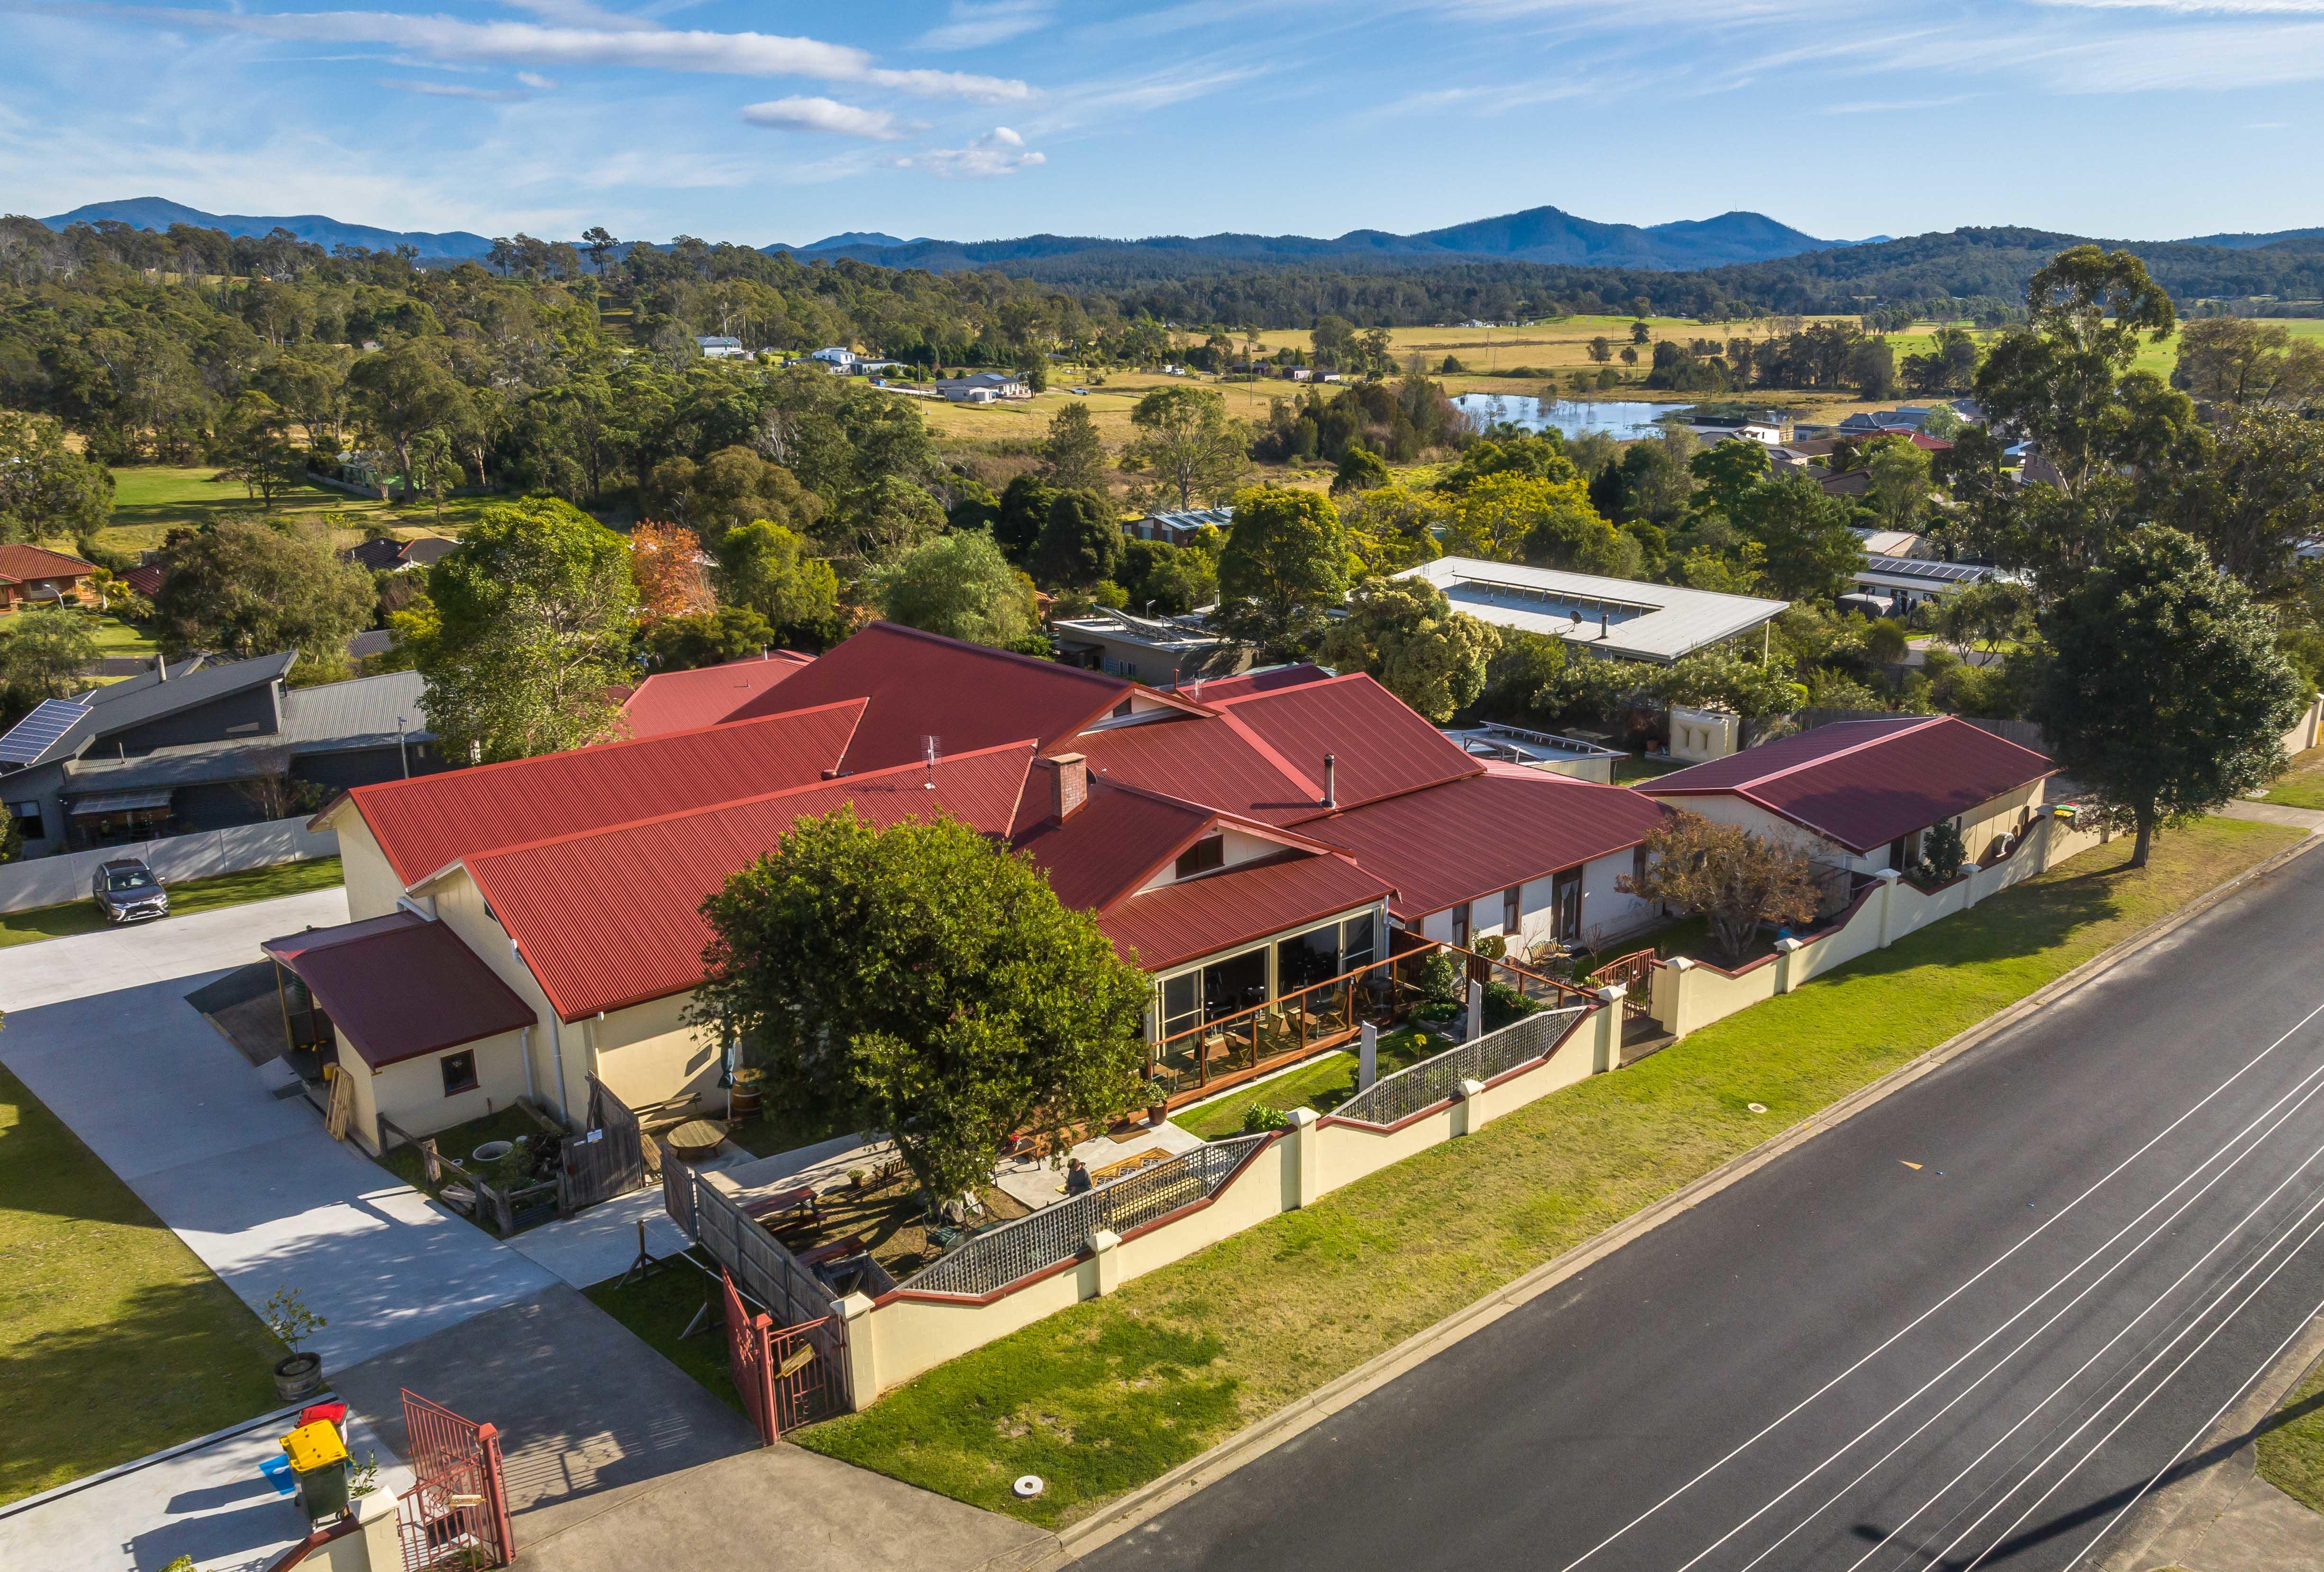 Quantum Brewery is located at the heritage listed Old Moruya Cheese Factory